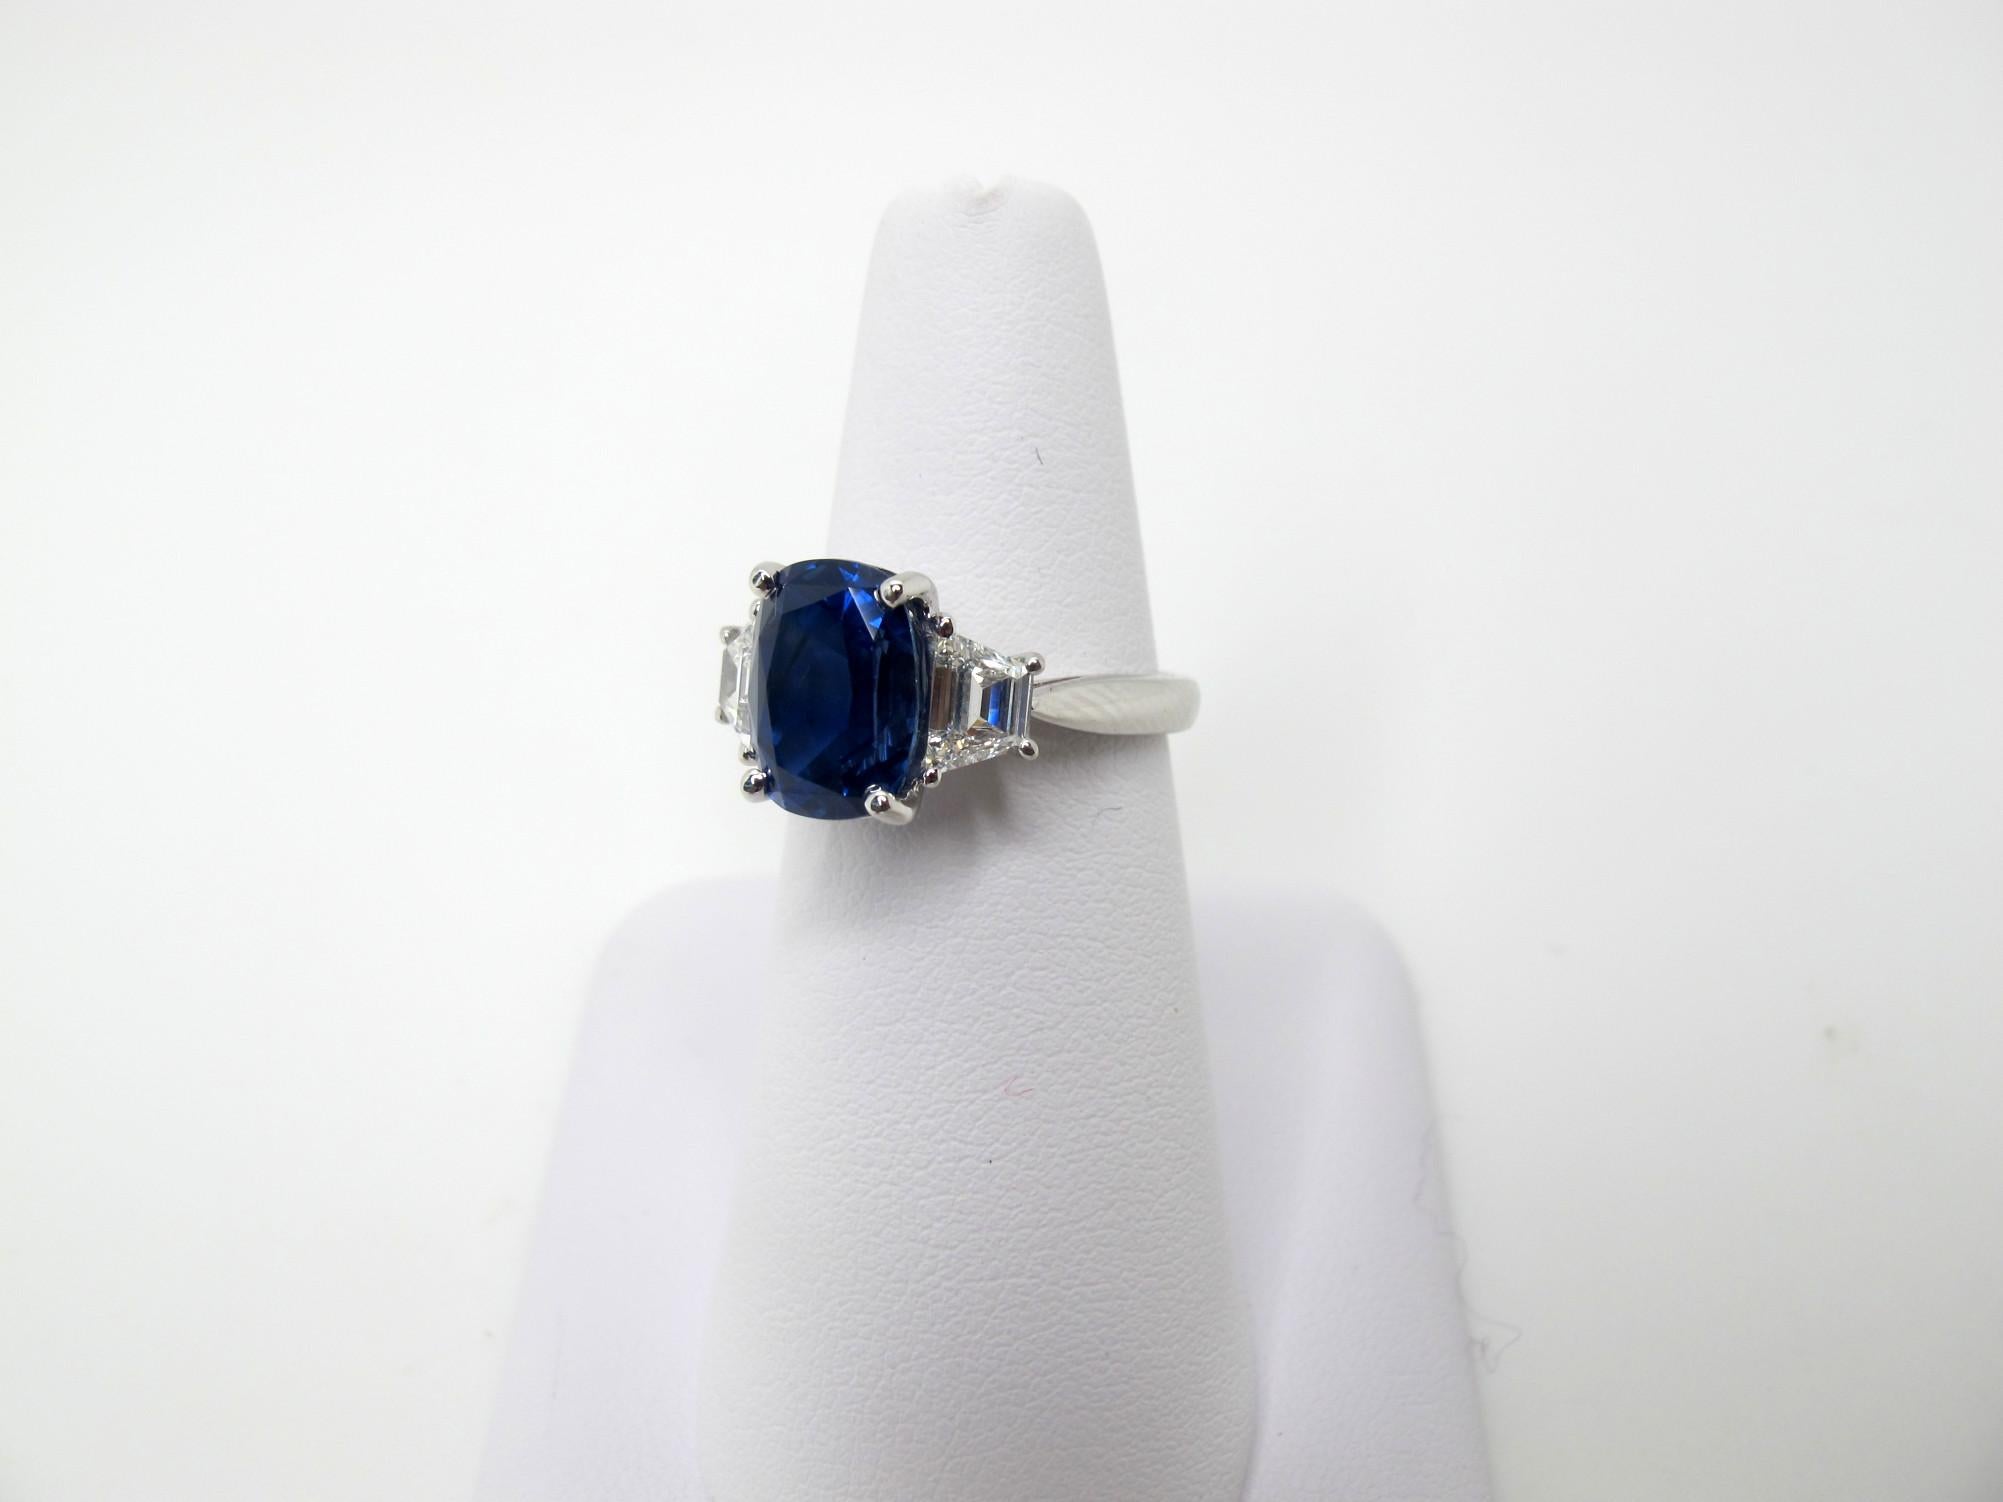 A rich, medium blue, gem quality sapphire that weighs 5.28 carats is featured in this ring. It is accompanied by Gemological Institute of America certificate #2151344955 which states that it is unheated and comes from Sri Lanka. The sapphire is